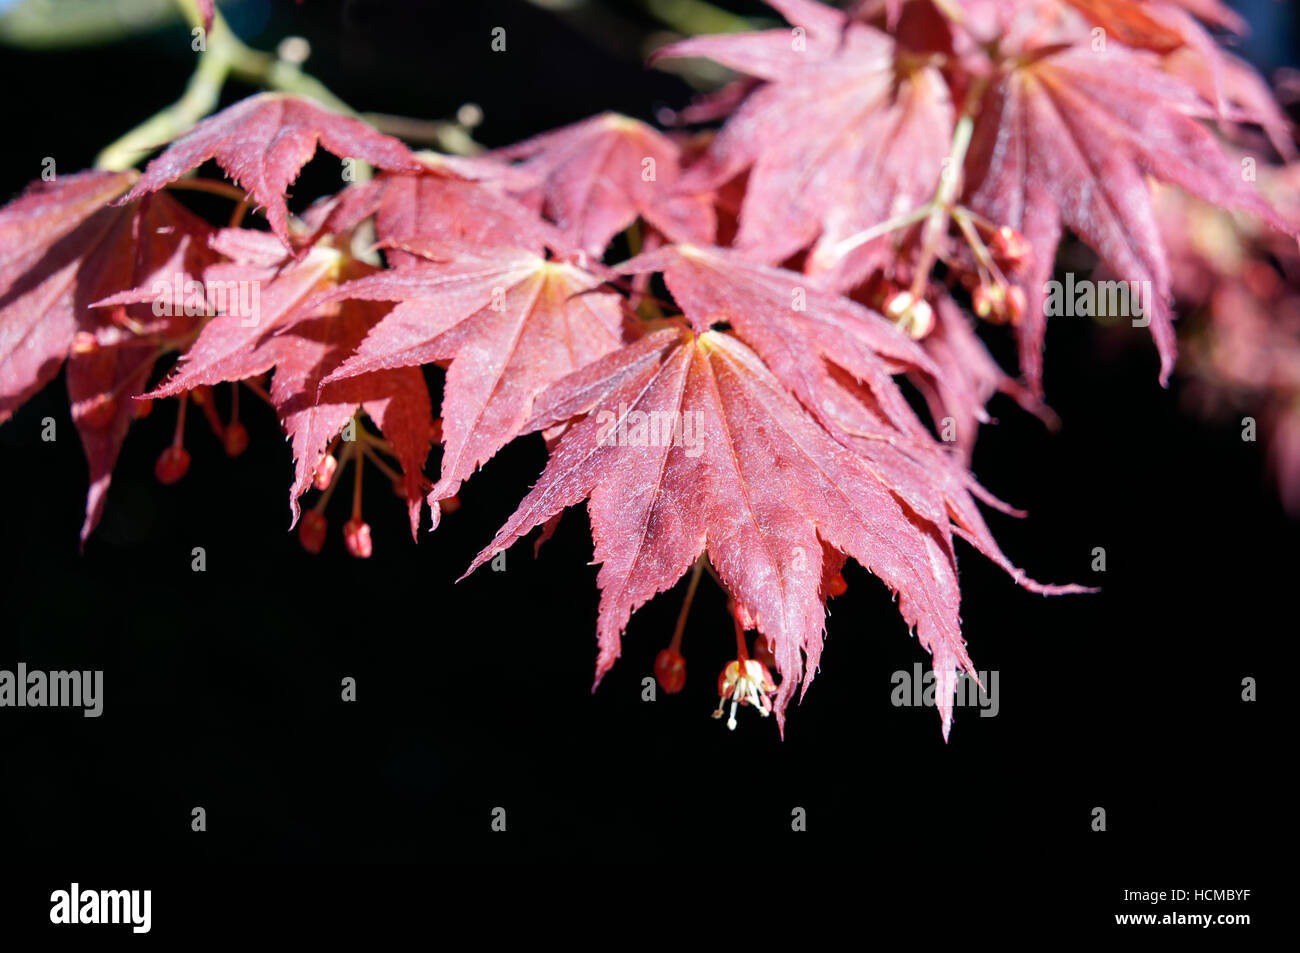 Close-up of red Japanese maple Acer palmatum tree leaves in spring, Vancouver, British Columbia, Canada Stock Photo